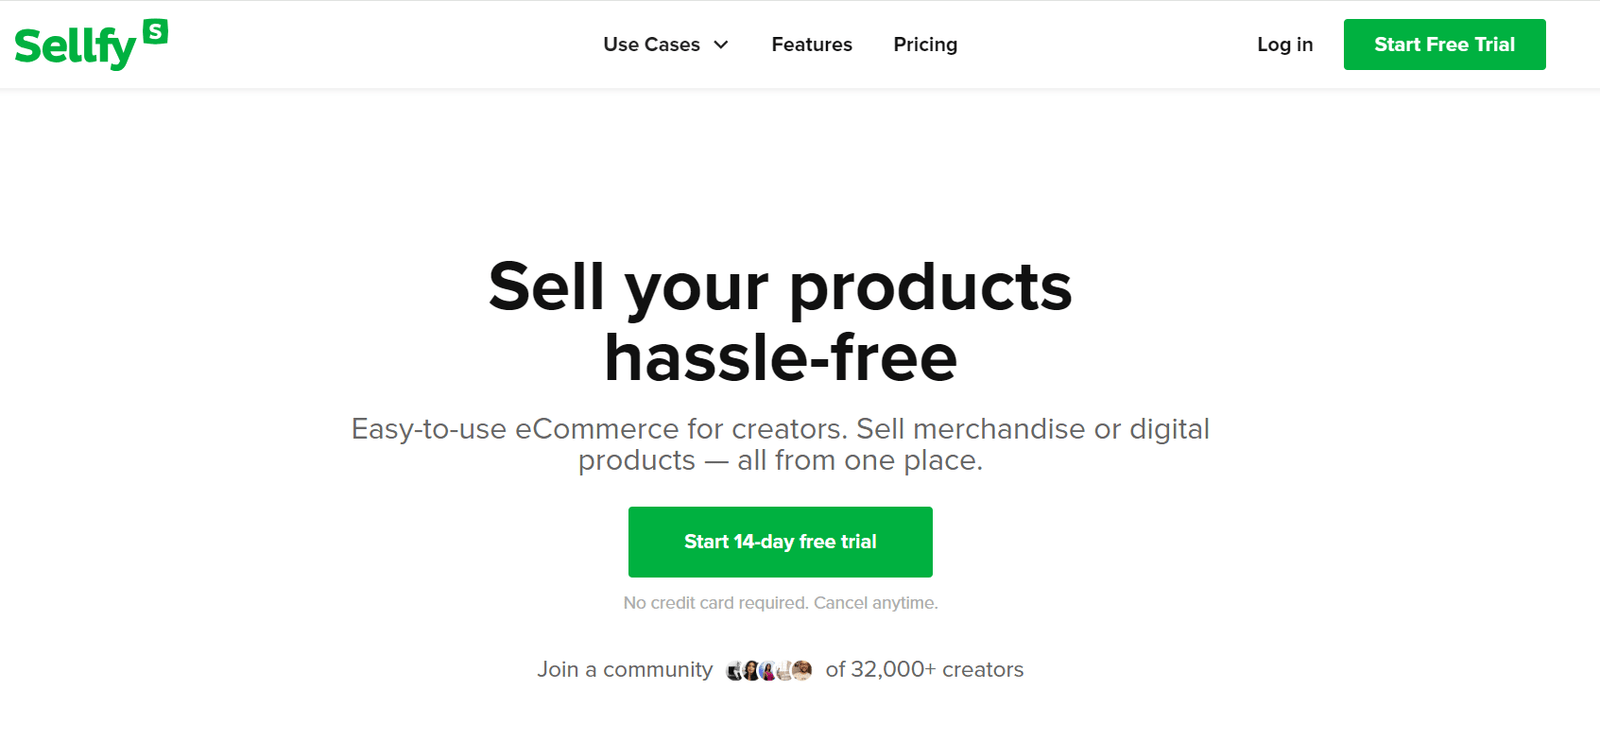 Sellfy, Web Hosting for Dropshipping